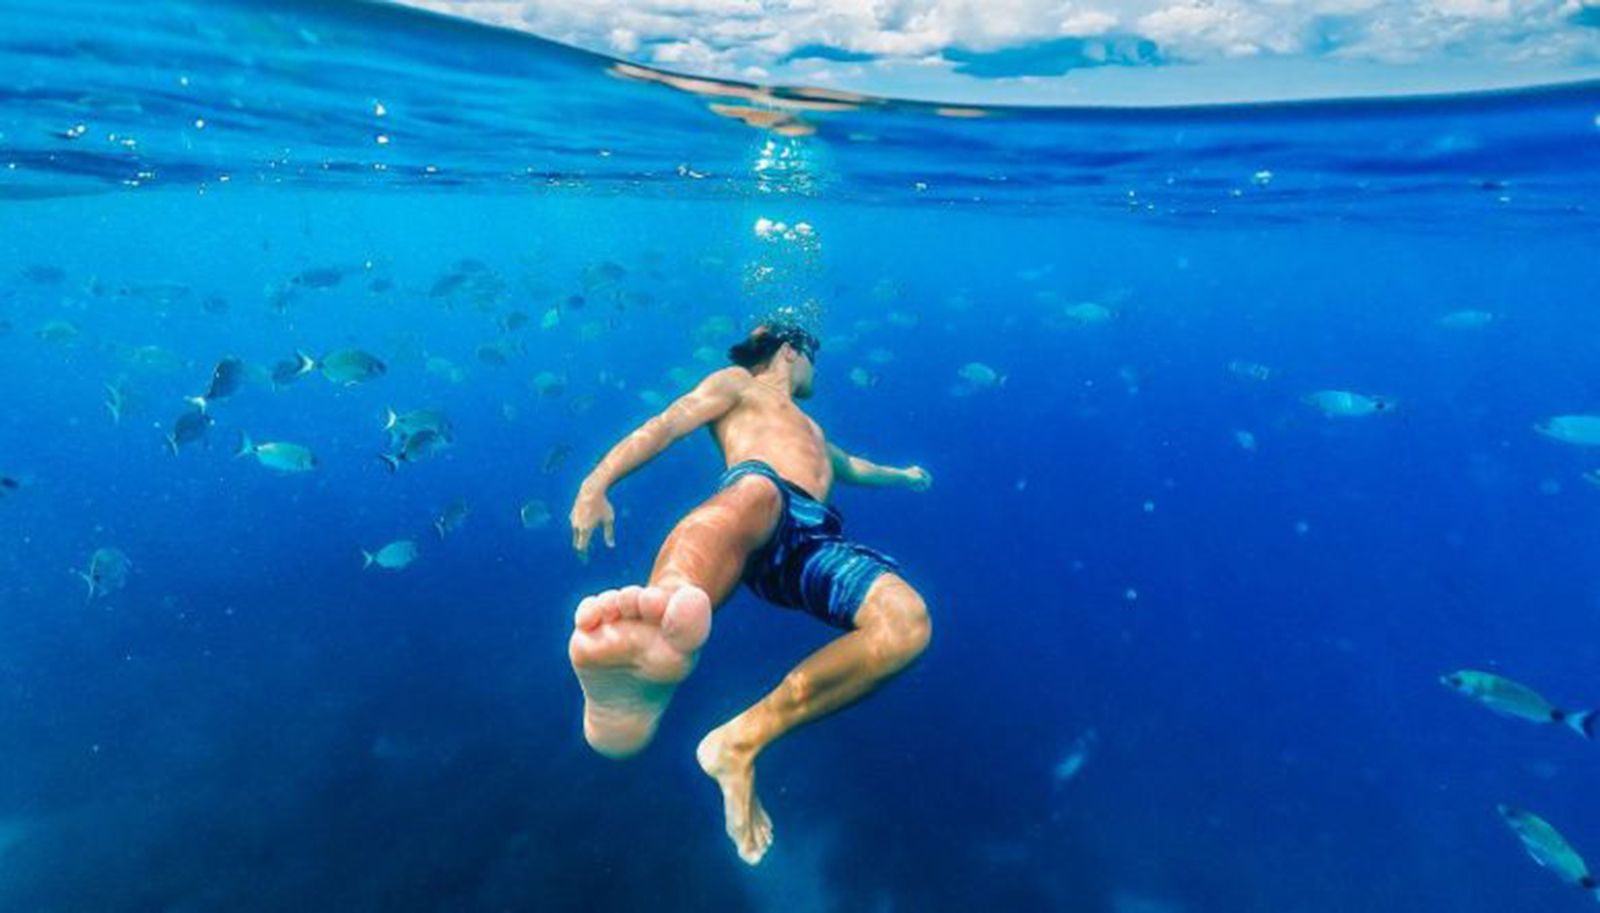 the best gopro photos in the world prepare to lose your breath image 16